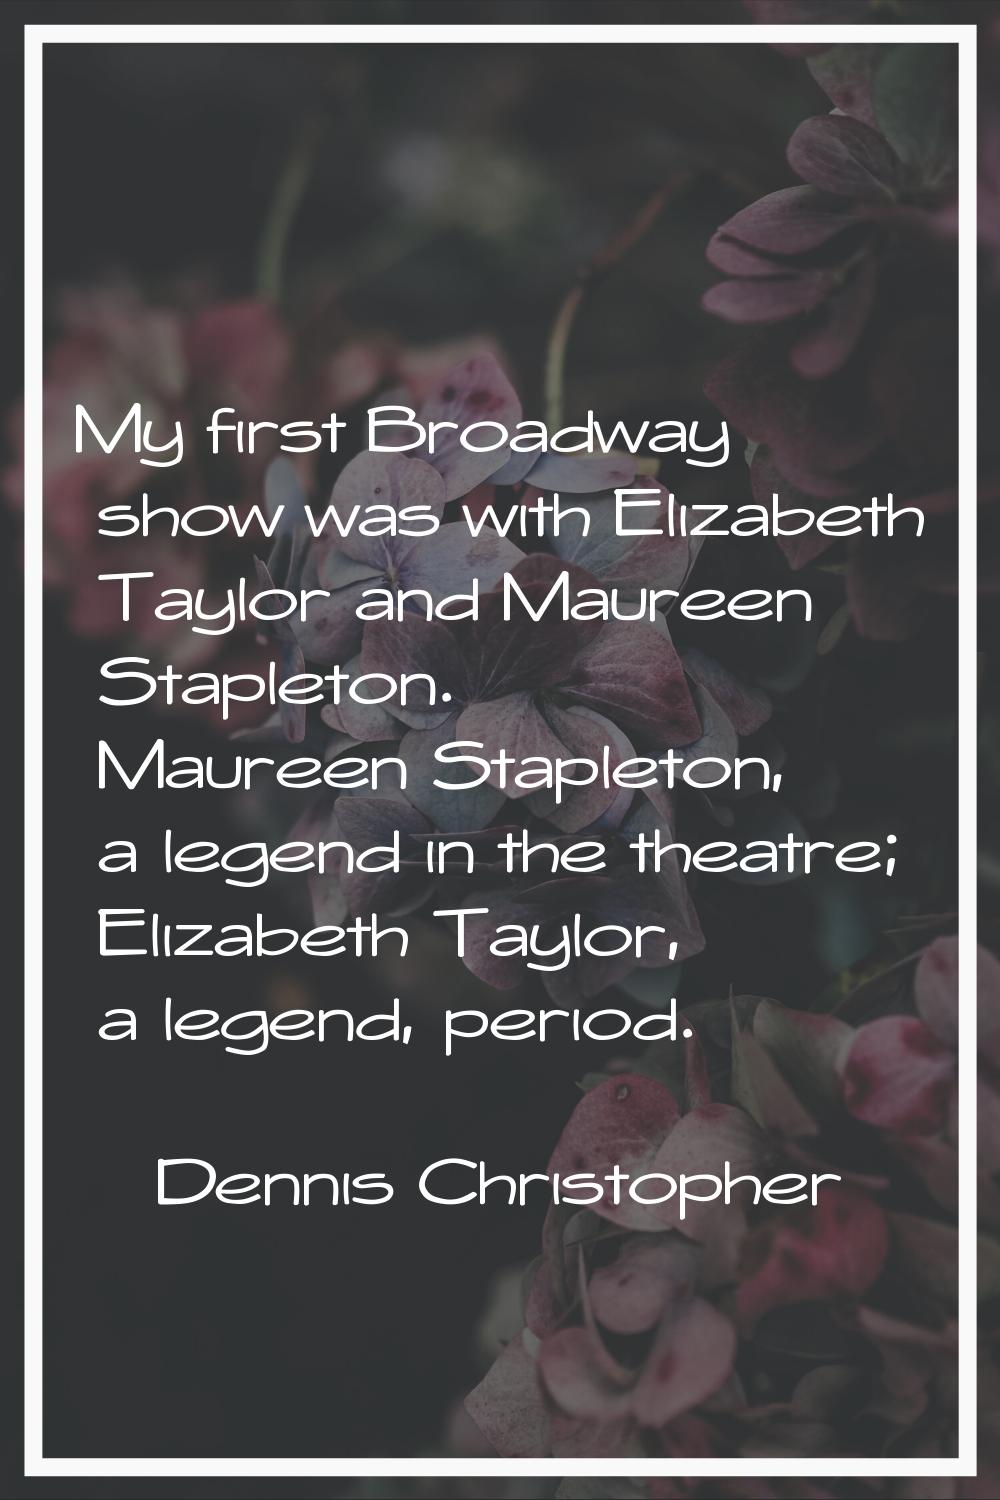 My first Broadway show was with Elizabeth Taylor and Maureen Stapleton. Maureen Stapleton, a legend